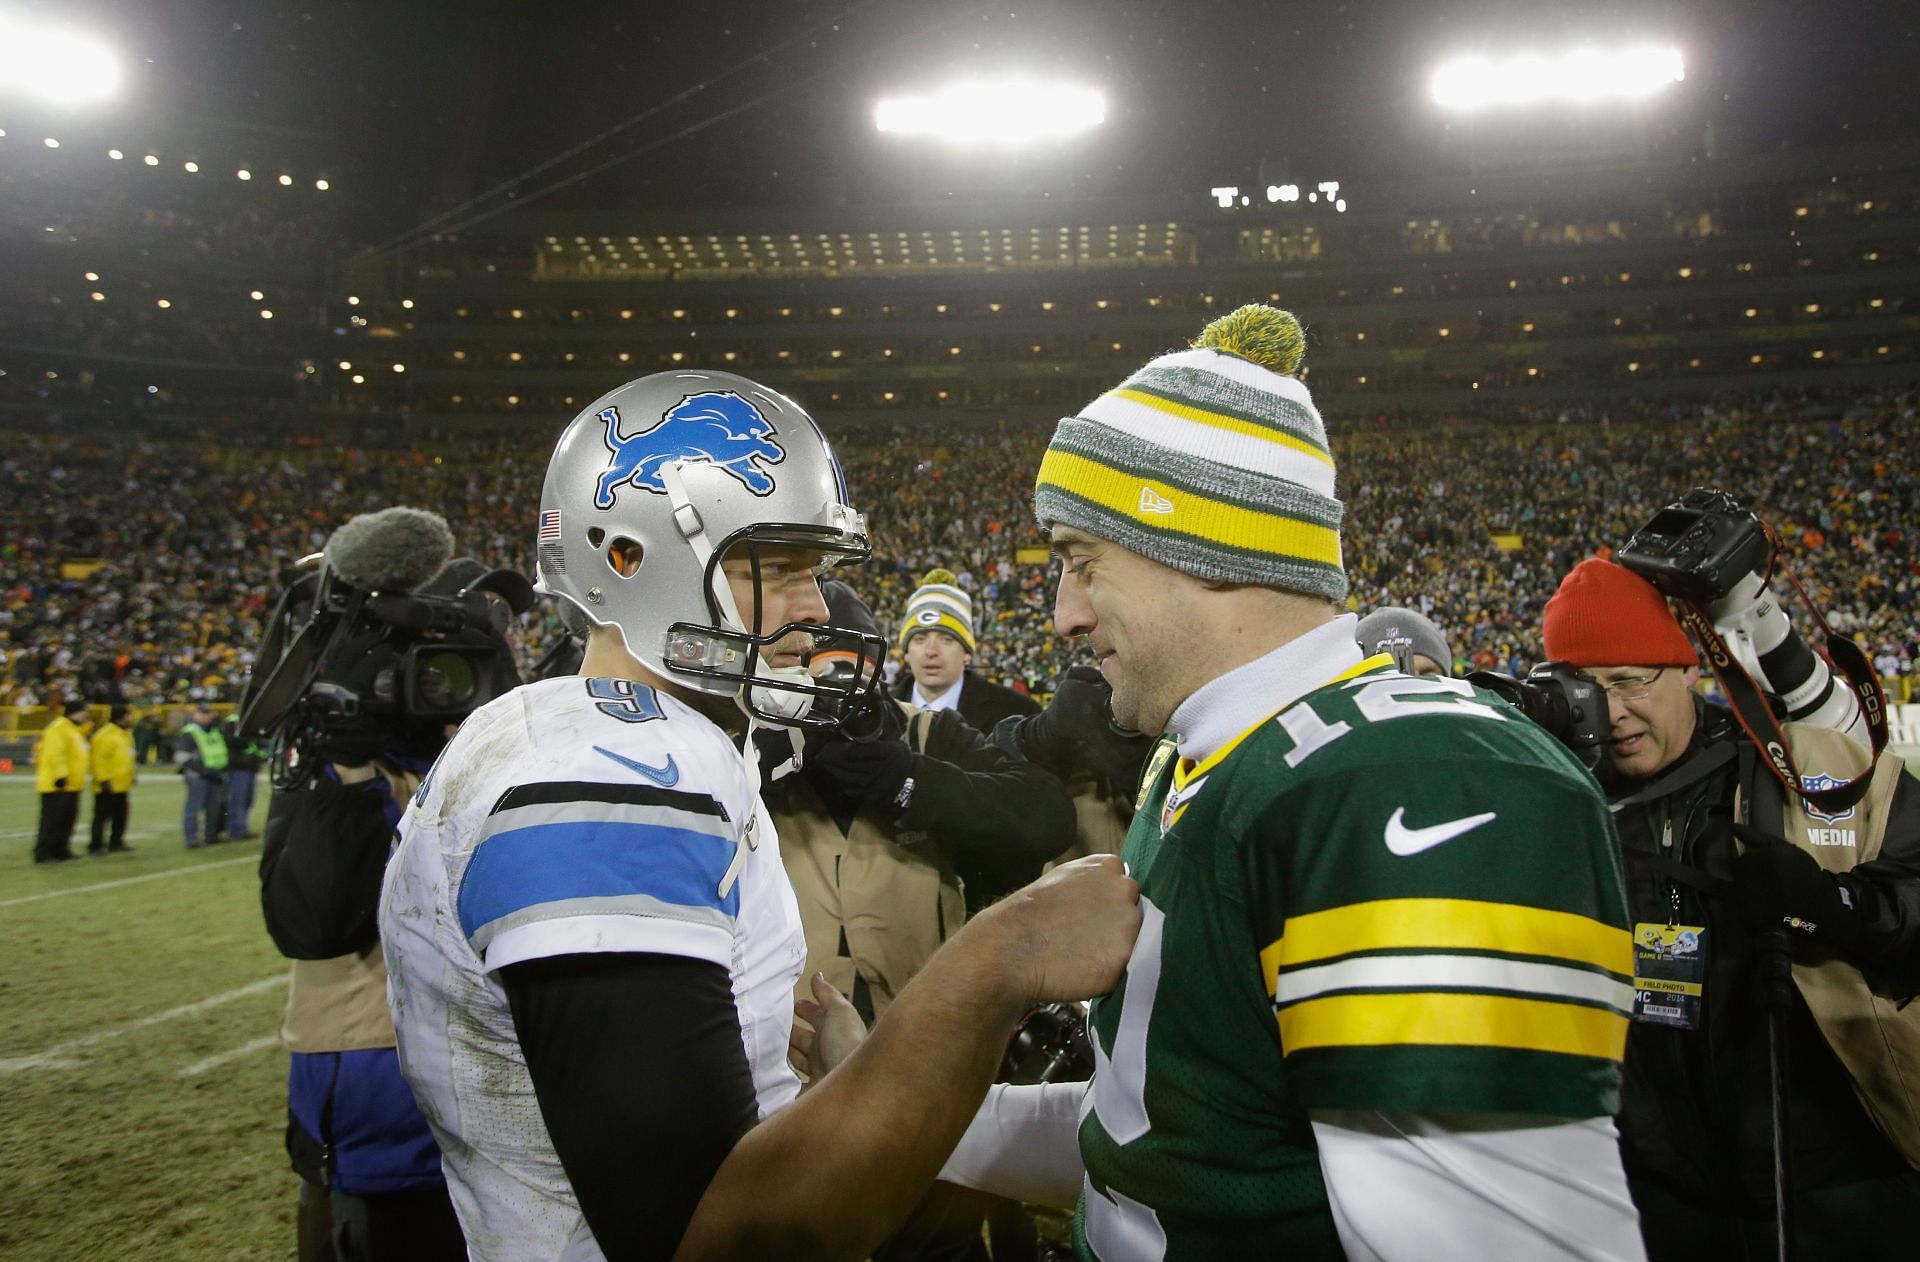 “Turns out Aaron Rodgers is on the same level as Stafford instead of Tom Brady” – NFL fans troll Packers QB after Super Bowl 2022